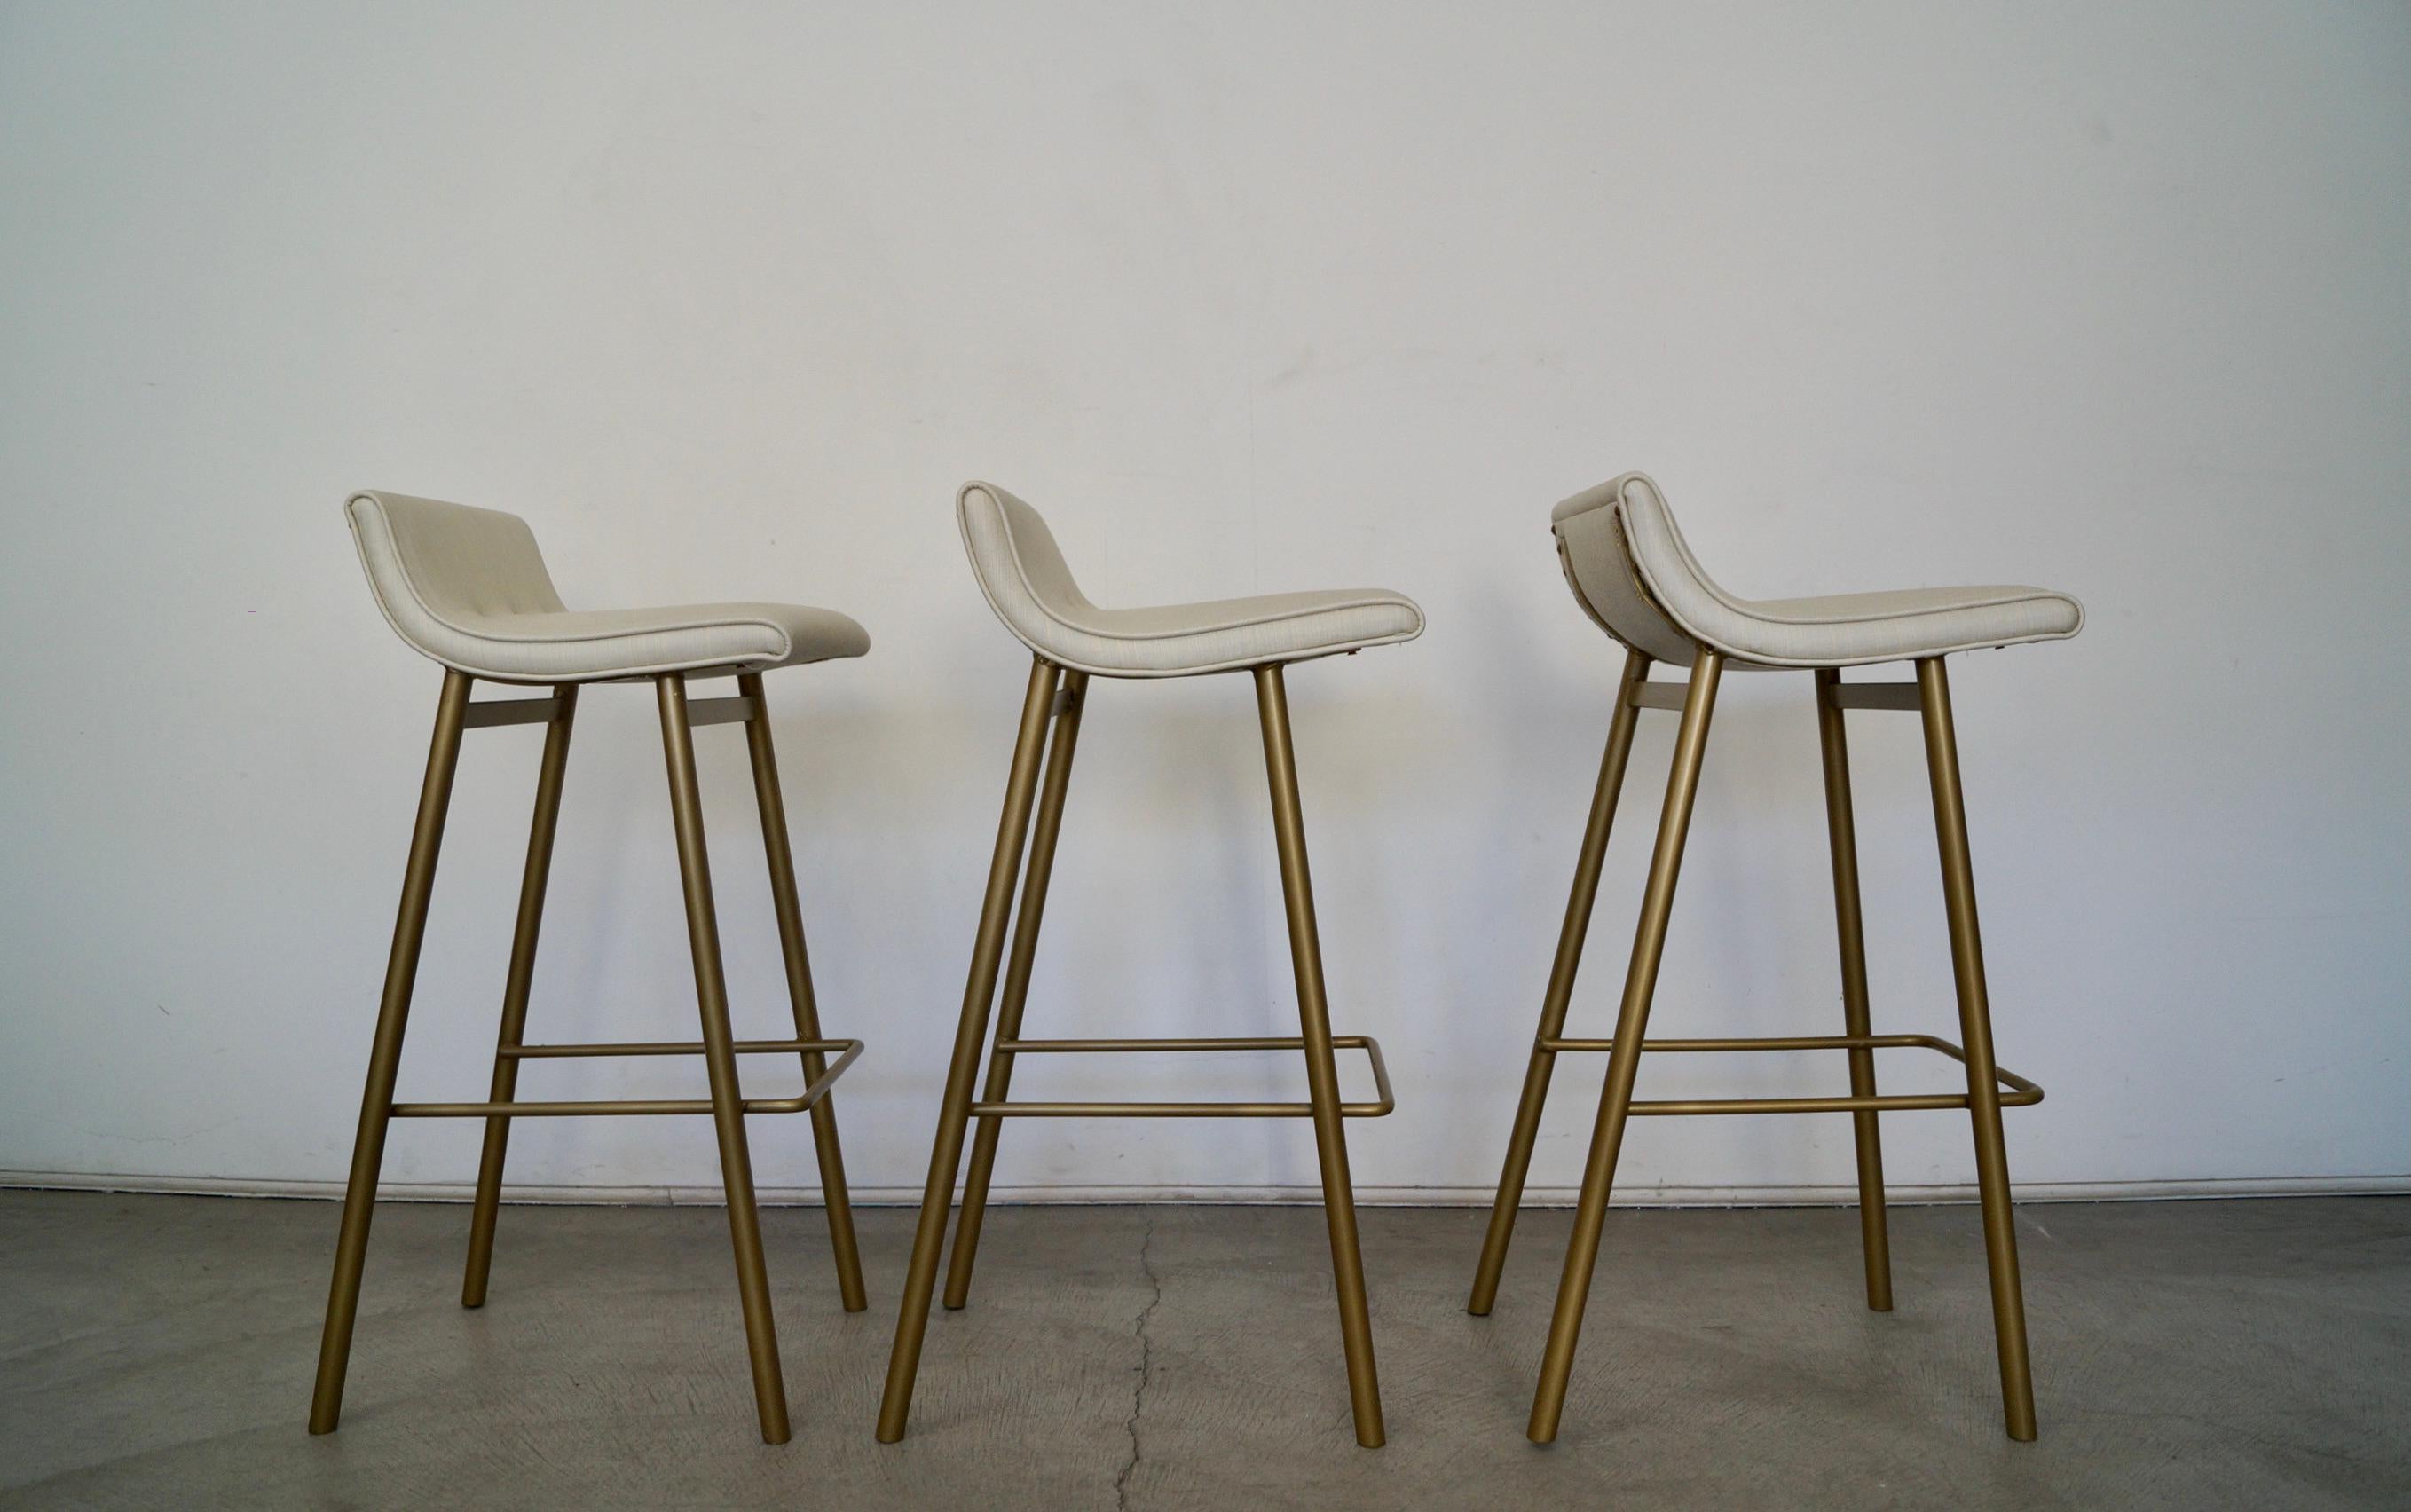 1950's Mid-Century Modern Bar Stools by Vista of California - Set of Three For Sale 6